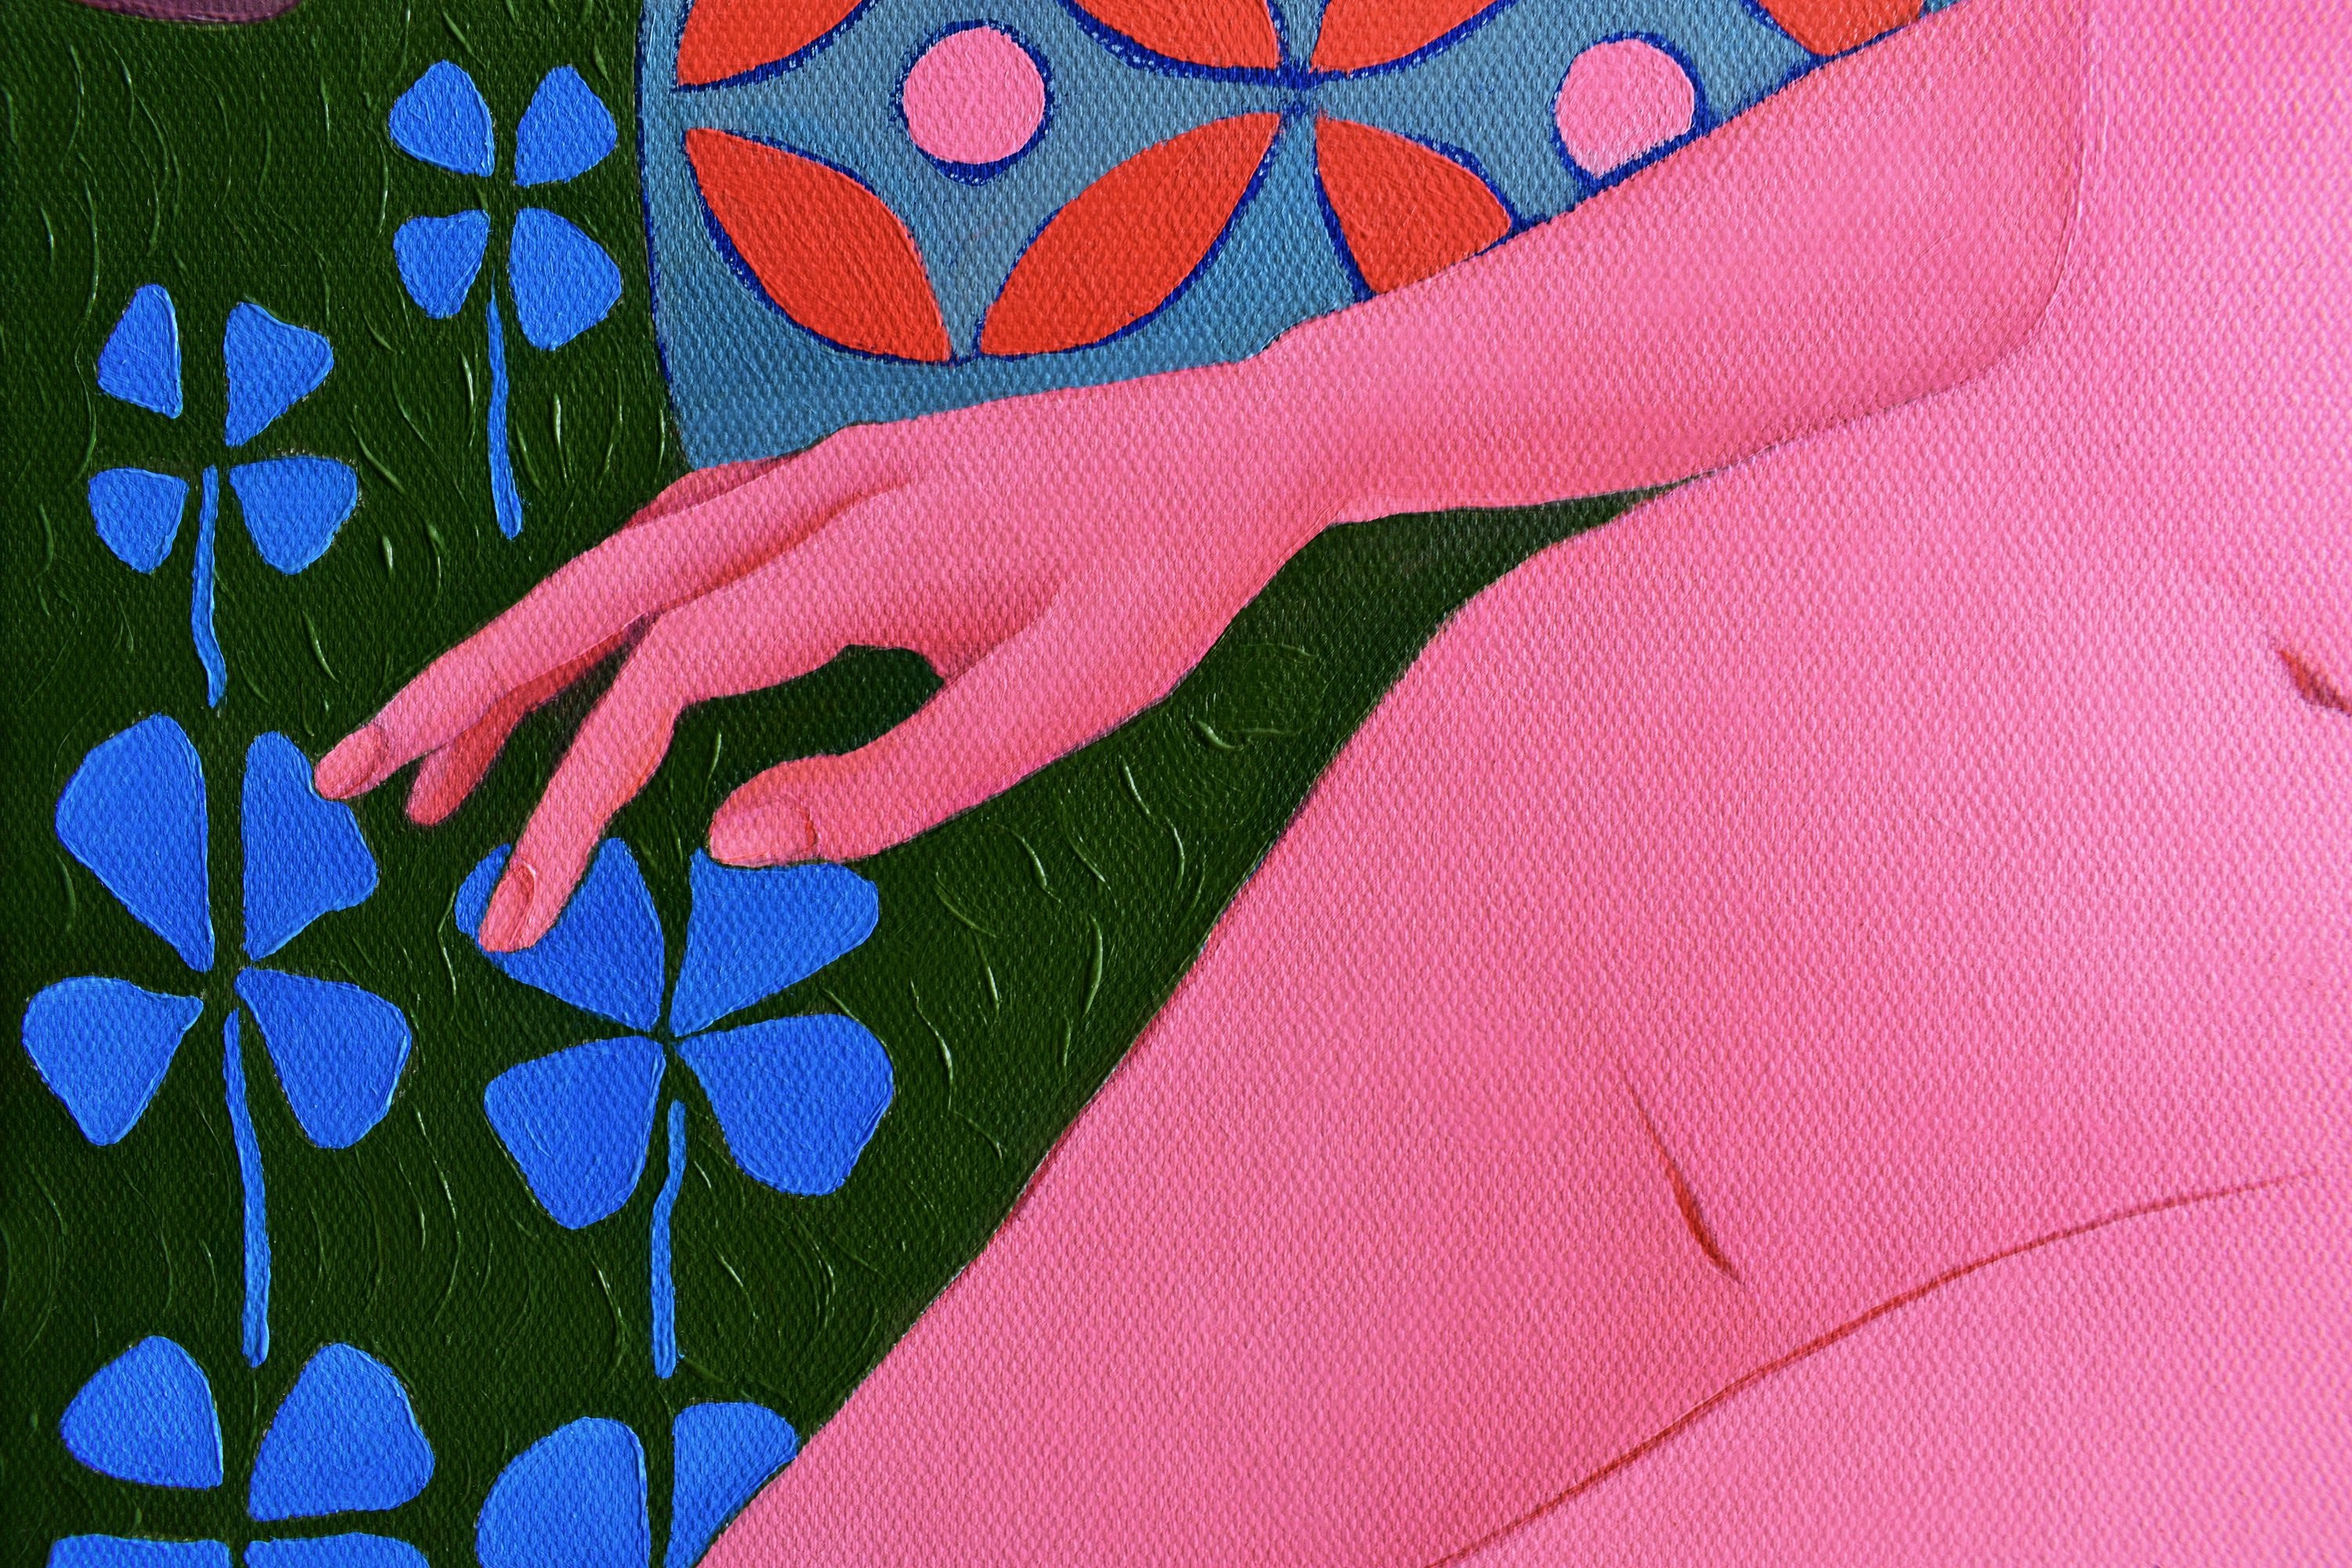 Painting by Marina Venediktova In the embrace of the garden detail